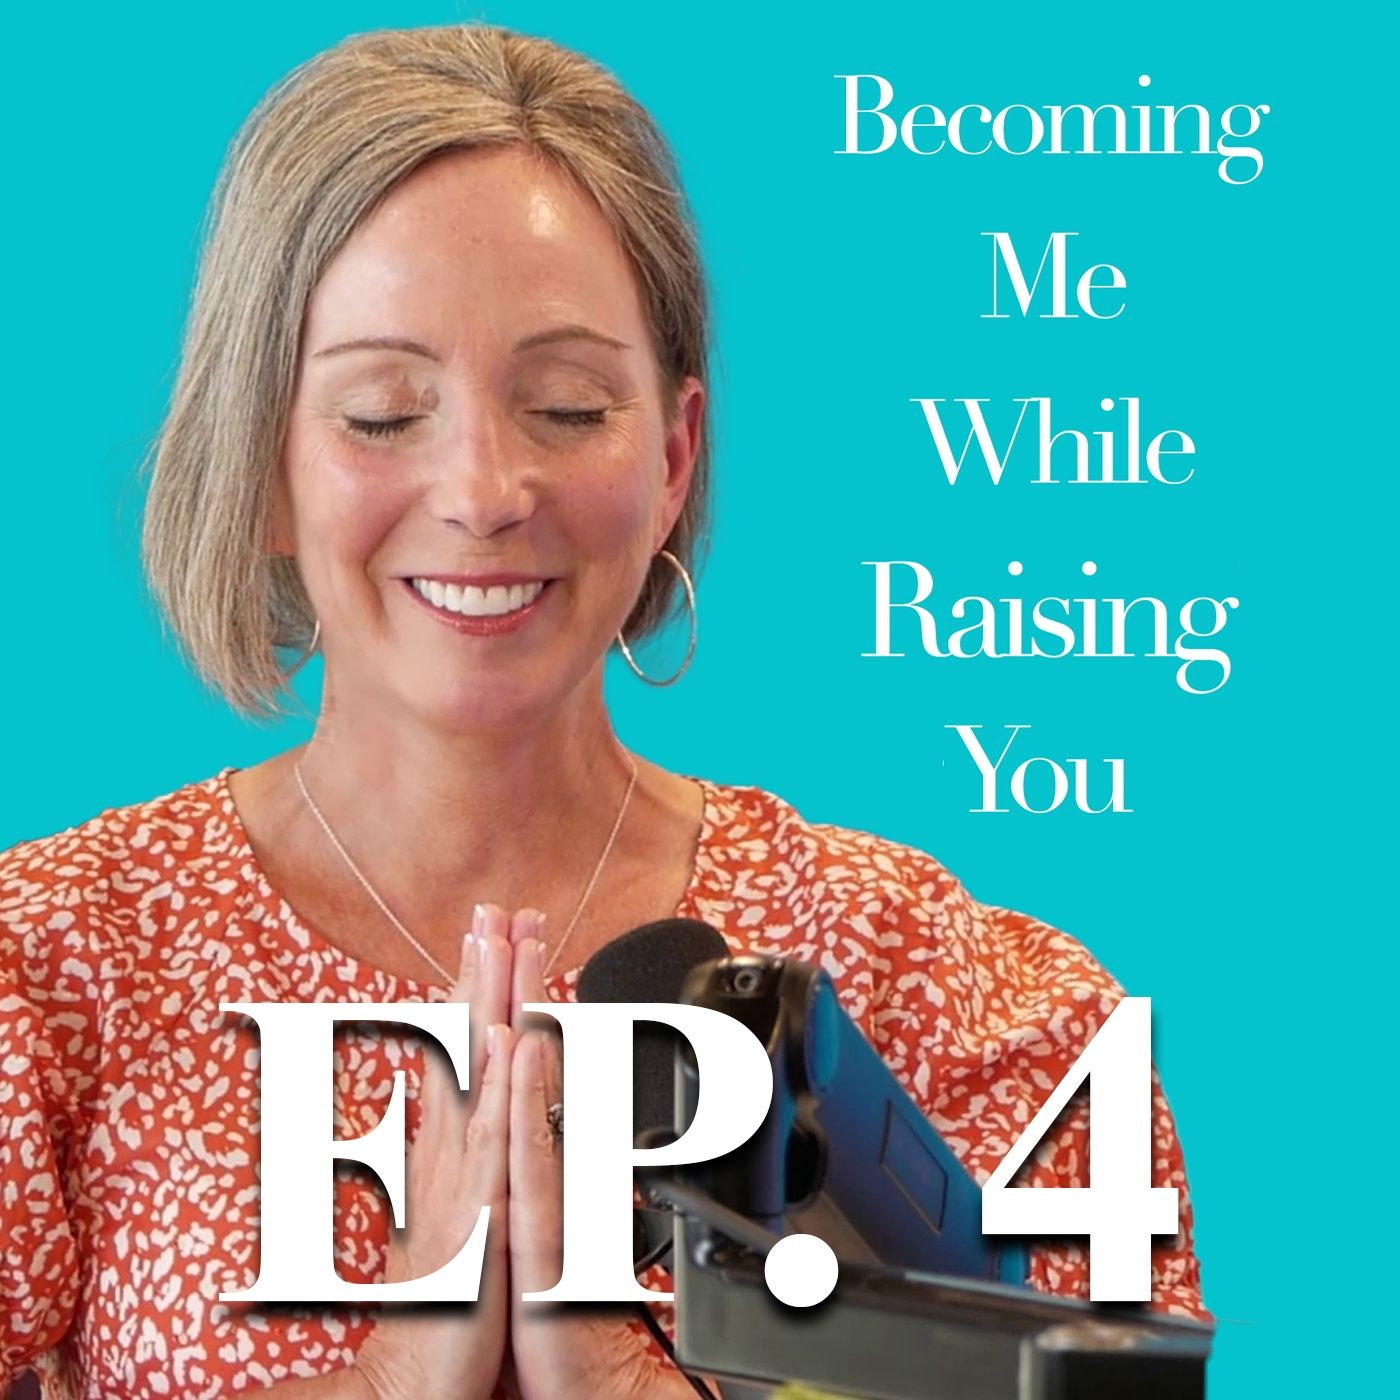 Laura Black on Episode 4 of Becoming Me While Raising You